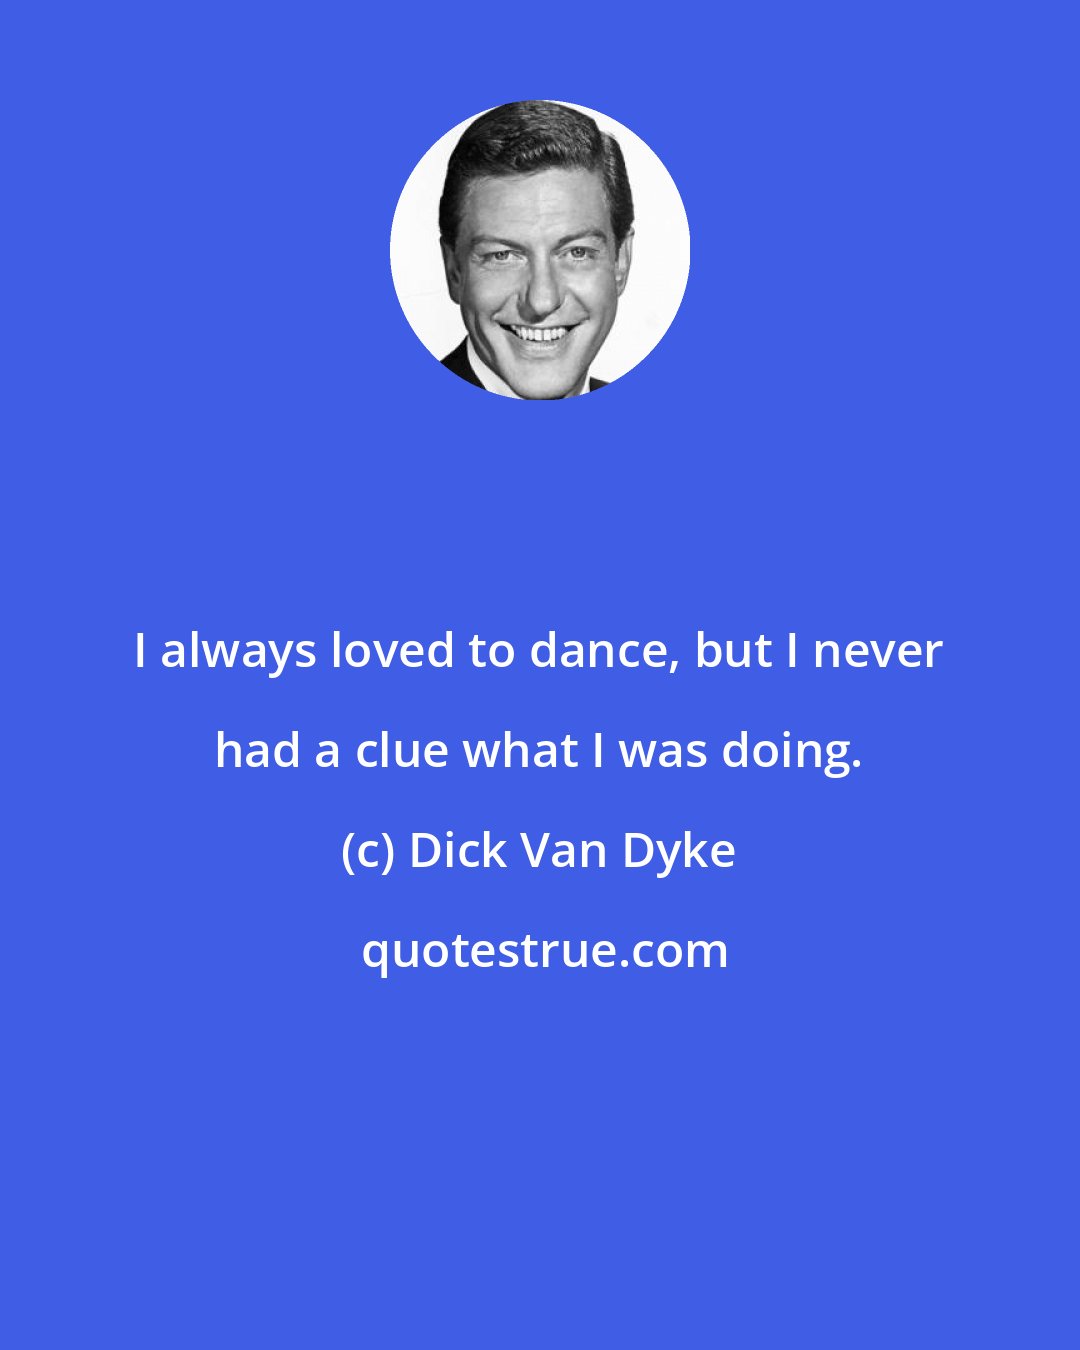 Dick Van Dyke: I always loved to dance, but I never had a clue what I was doing.